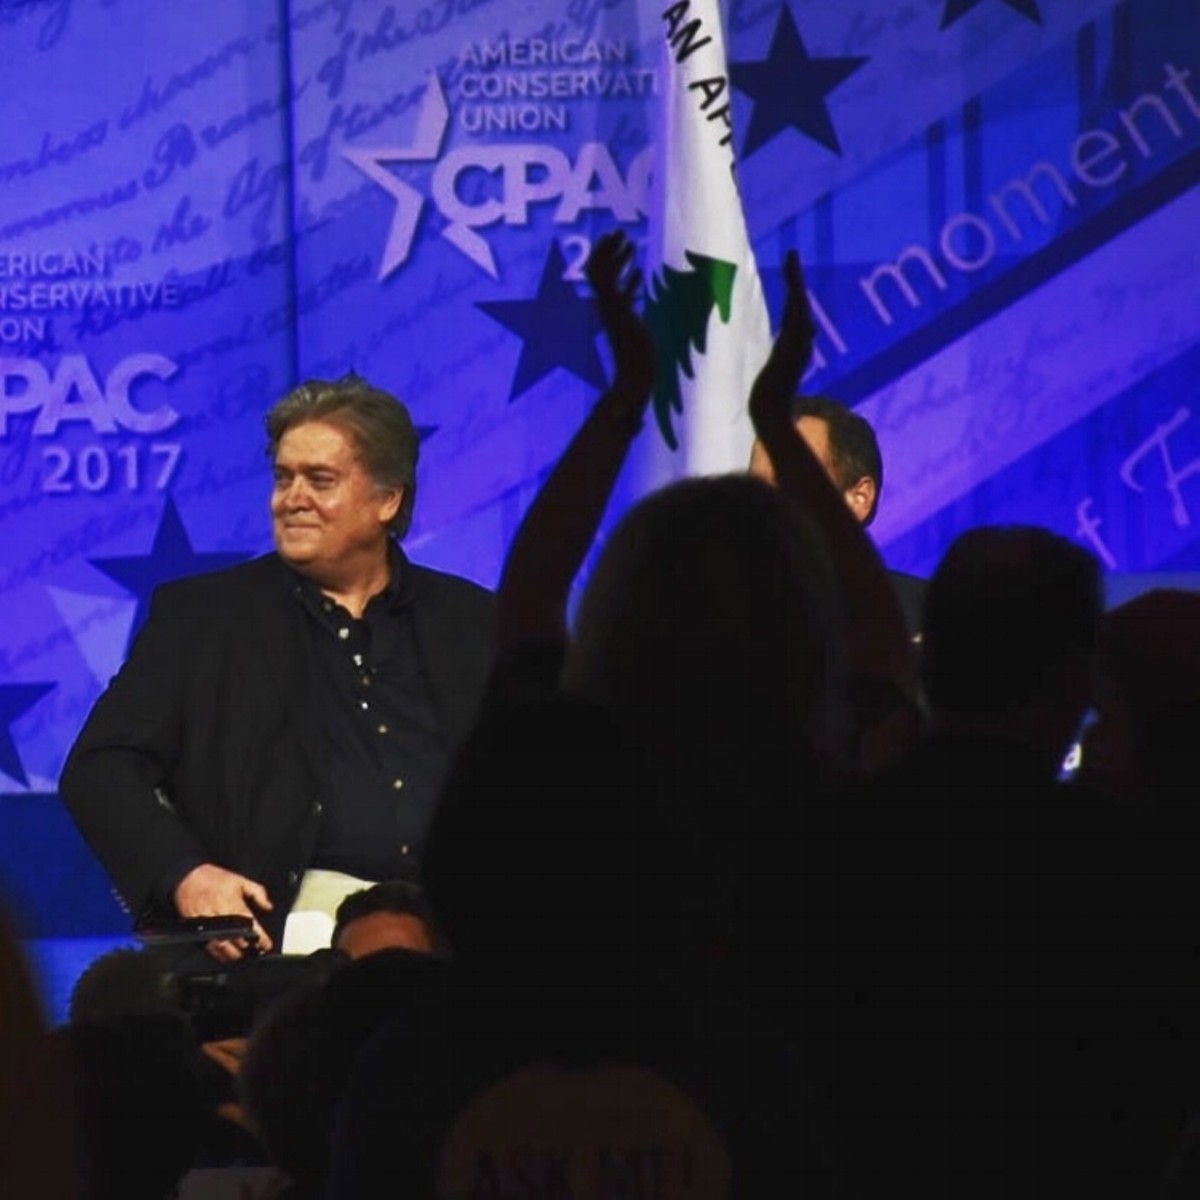 Steve Bannon said at the CPAC that he wanted the “deconstruction of the administrative state.”